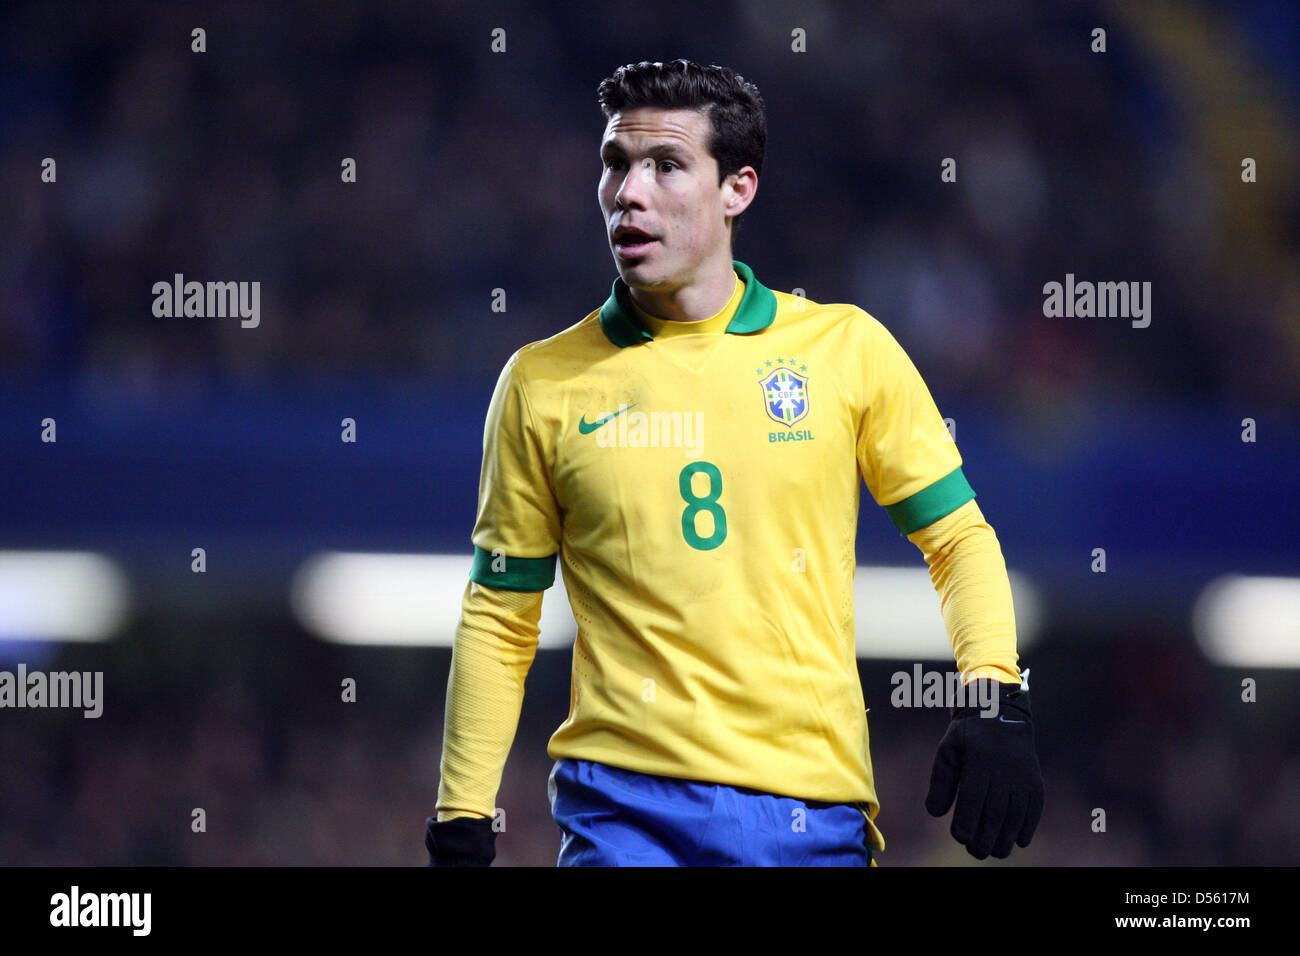 London, UK. 25th March 2013. 25.03.2013 London, England.  Hernanes of Brazil during the International Friendly between Brazil and Russia from the Stamford Bridge. Credit: Action Plus Sports Images / Alamy Live News Stock Photo